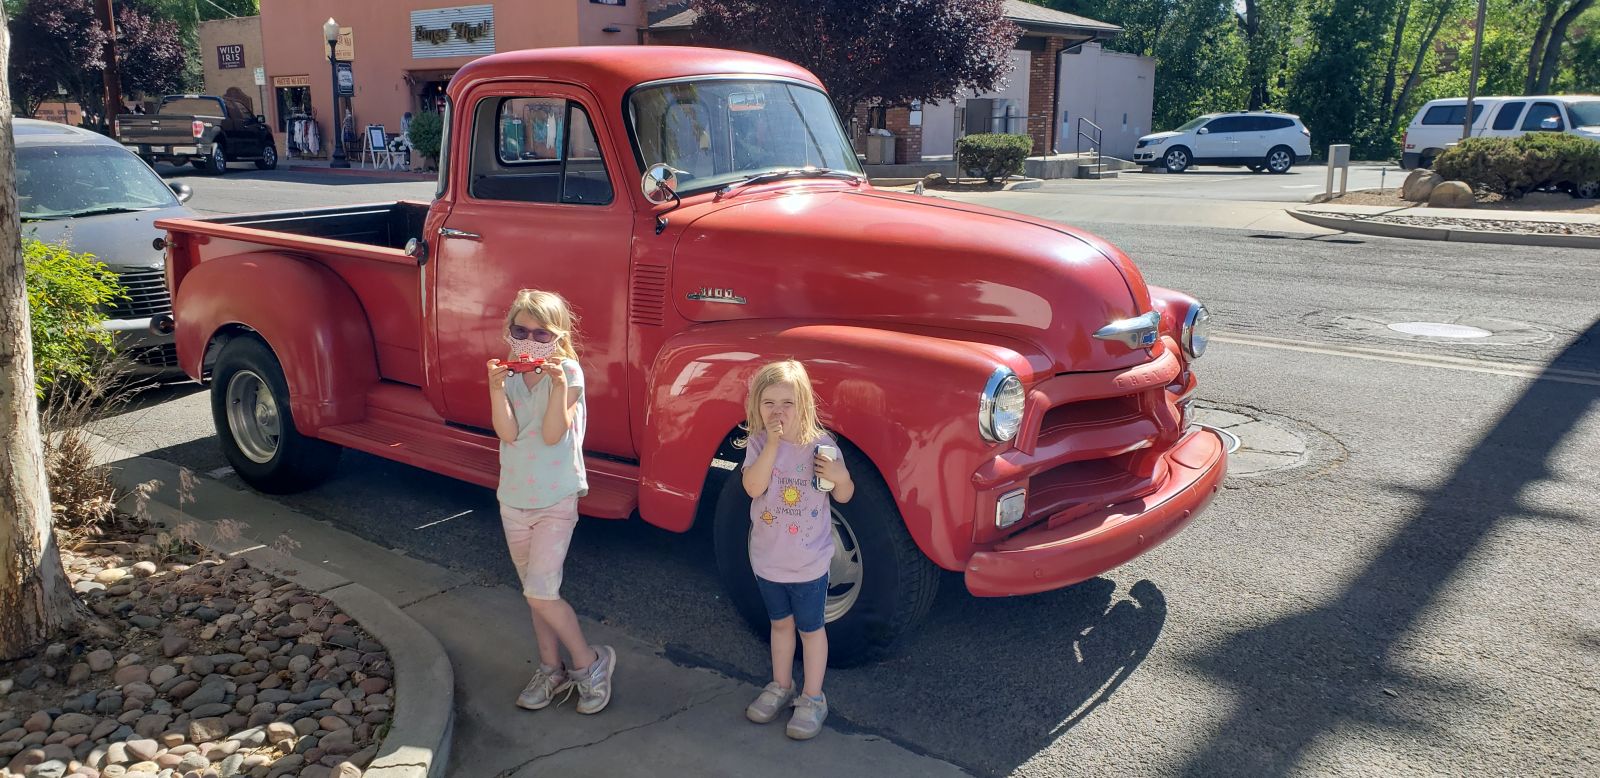 The kiddo’s with the shop truck